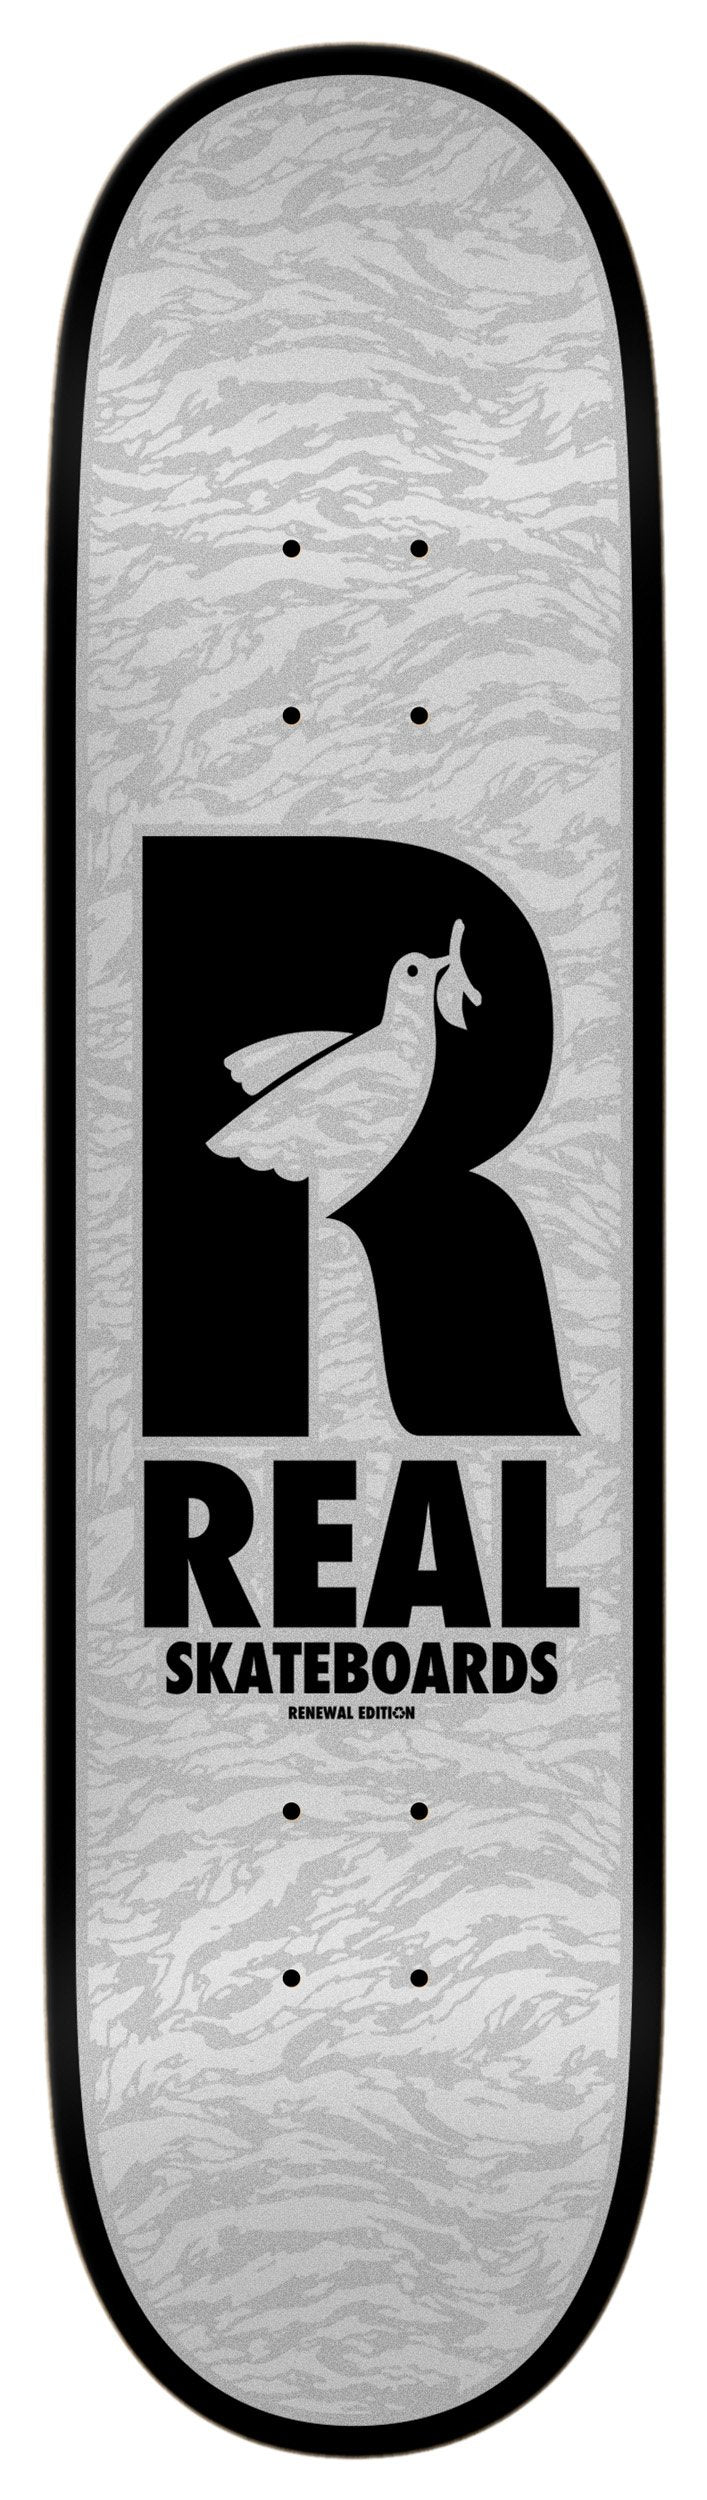 Real Skateboards Renewal Doves Pricepoint Deck 8.25